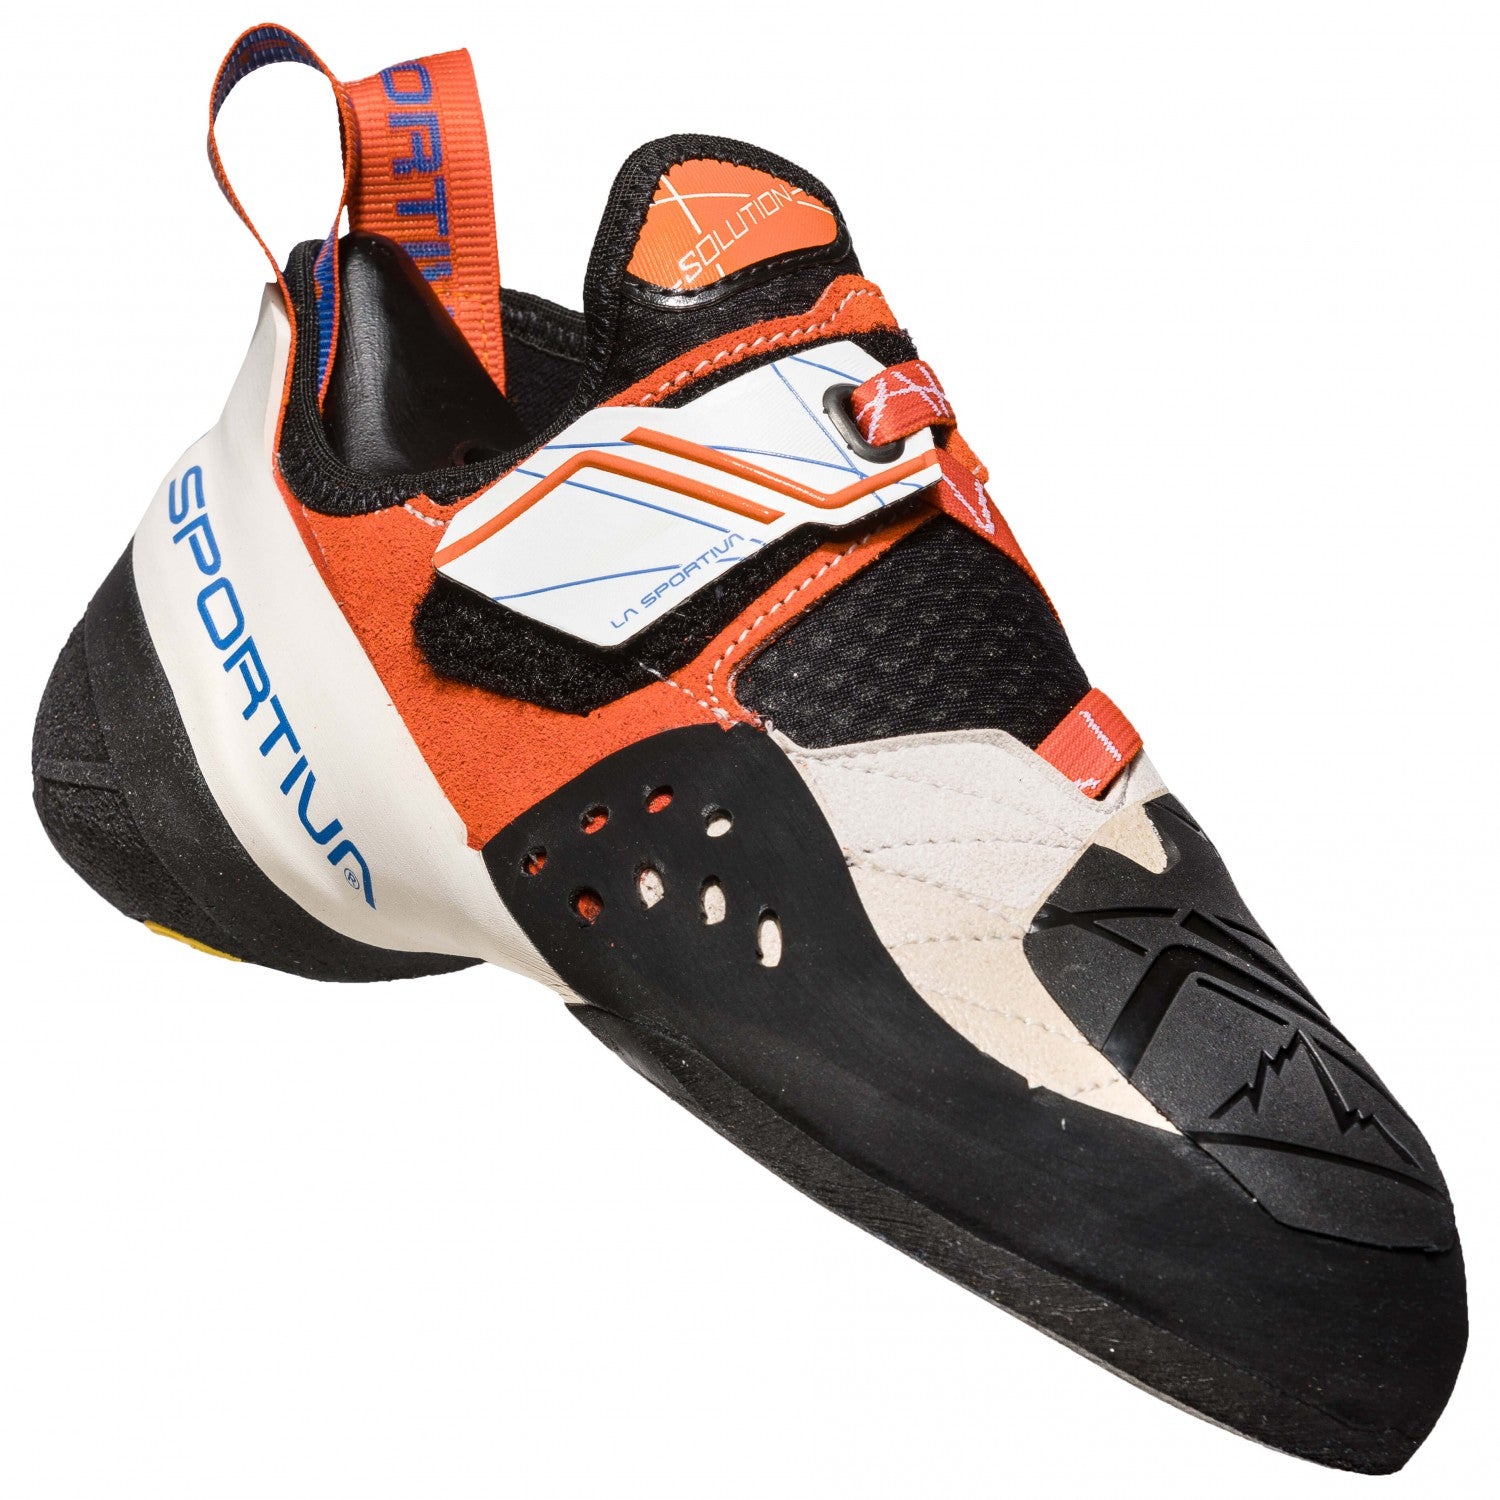 La Sportiva Solution Women's climbing shoe, in black, White and orange colour as seen from the side